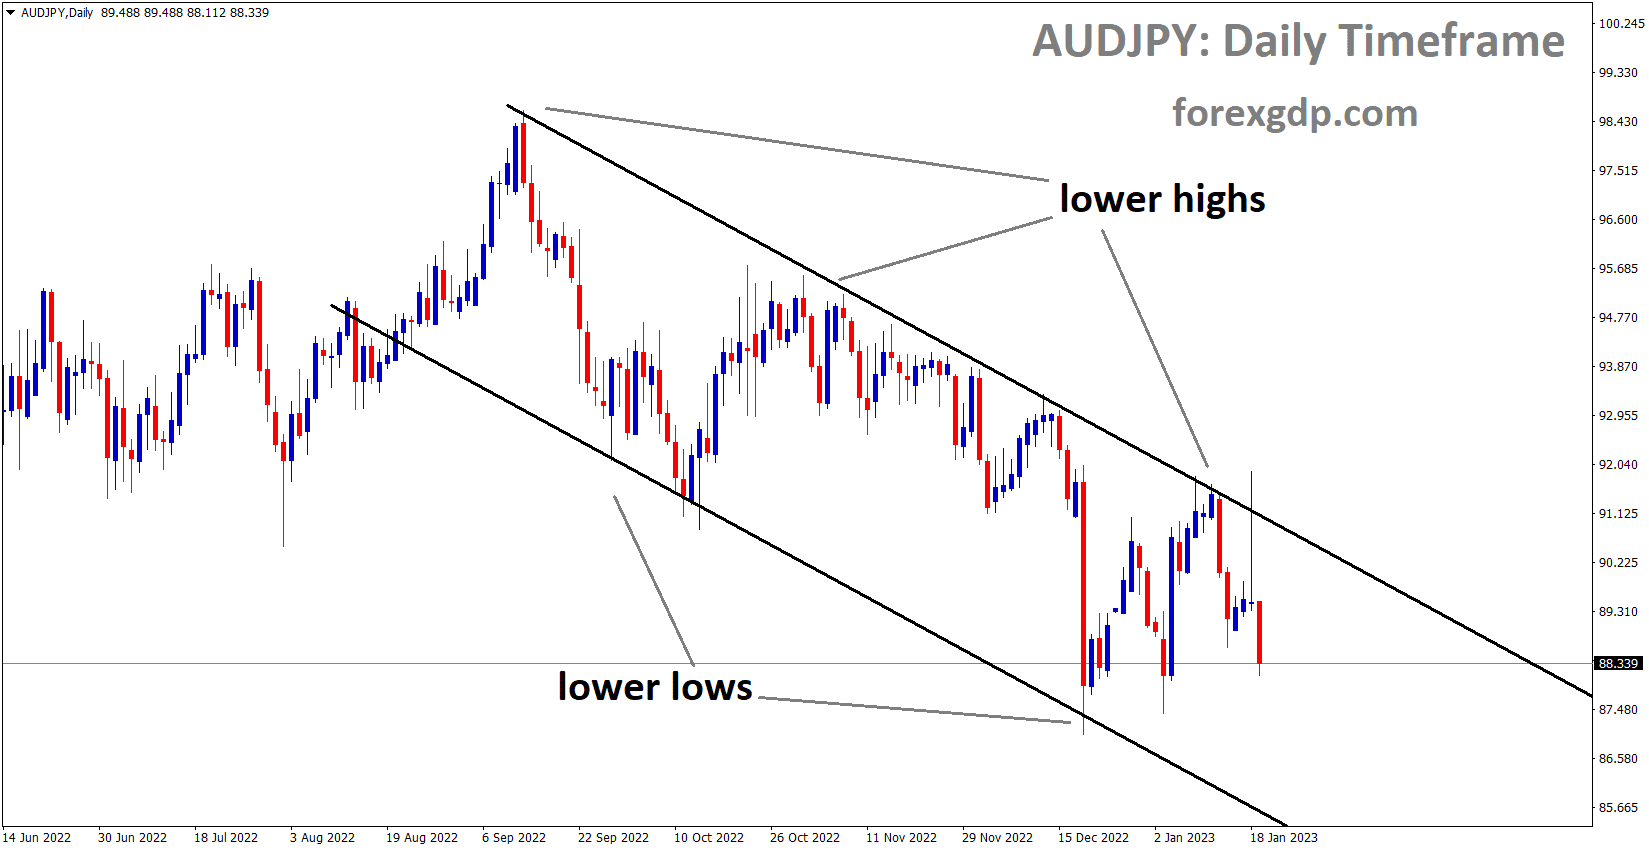 AUDJPY is moving in the Descending channel and the market has fallen from the lower high area of the channel